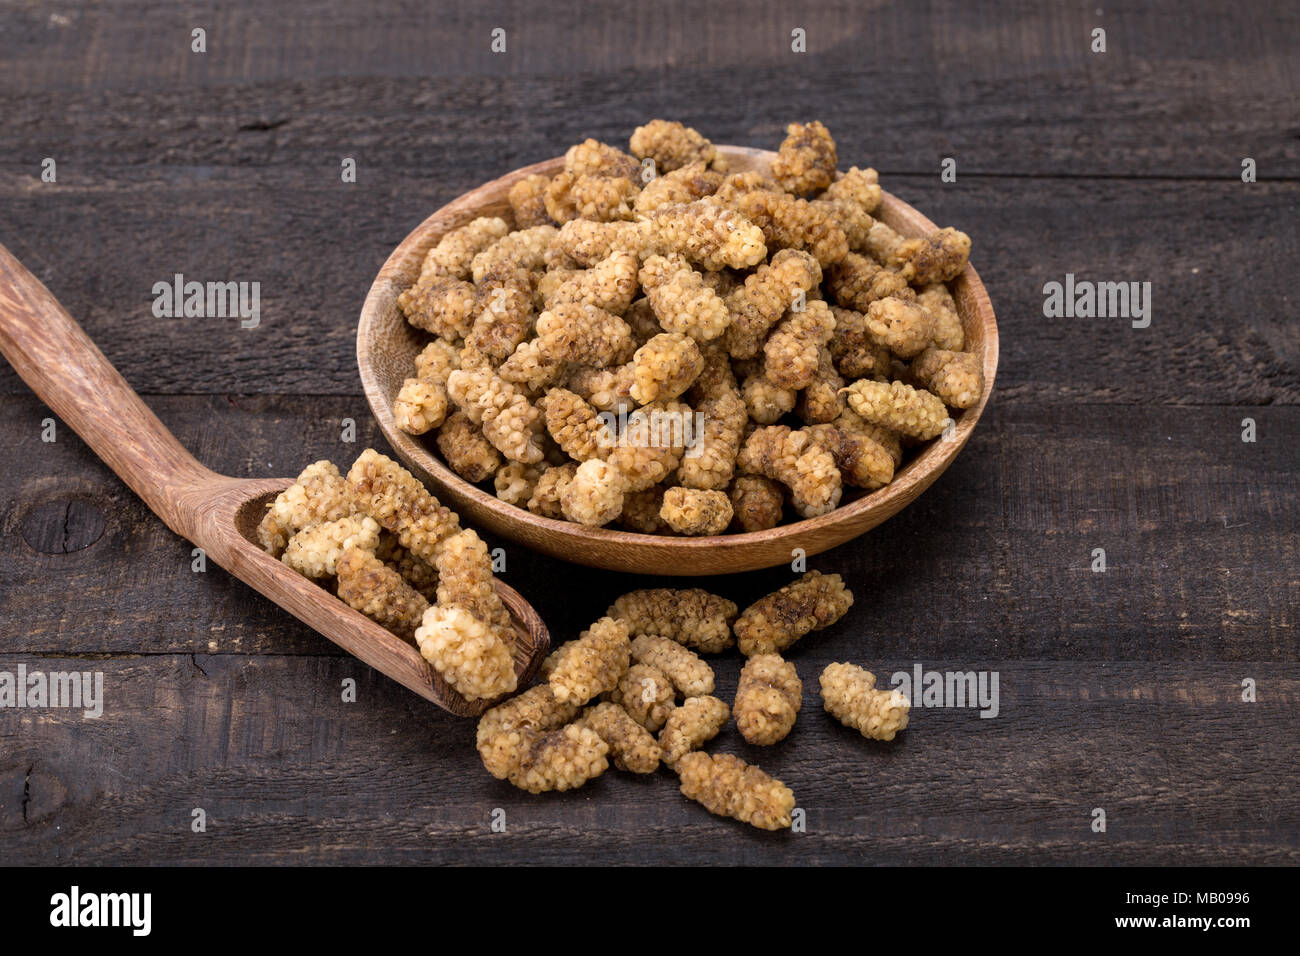 Close Up Shot Of Dried White Mulberries Fruits In A Wooden Bowl And Spoon On Dark Wooden Background, A Healthy And Popular Sweet Snacks In Iran And Tu Stock Photo